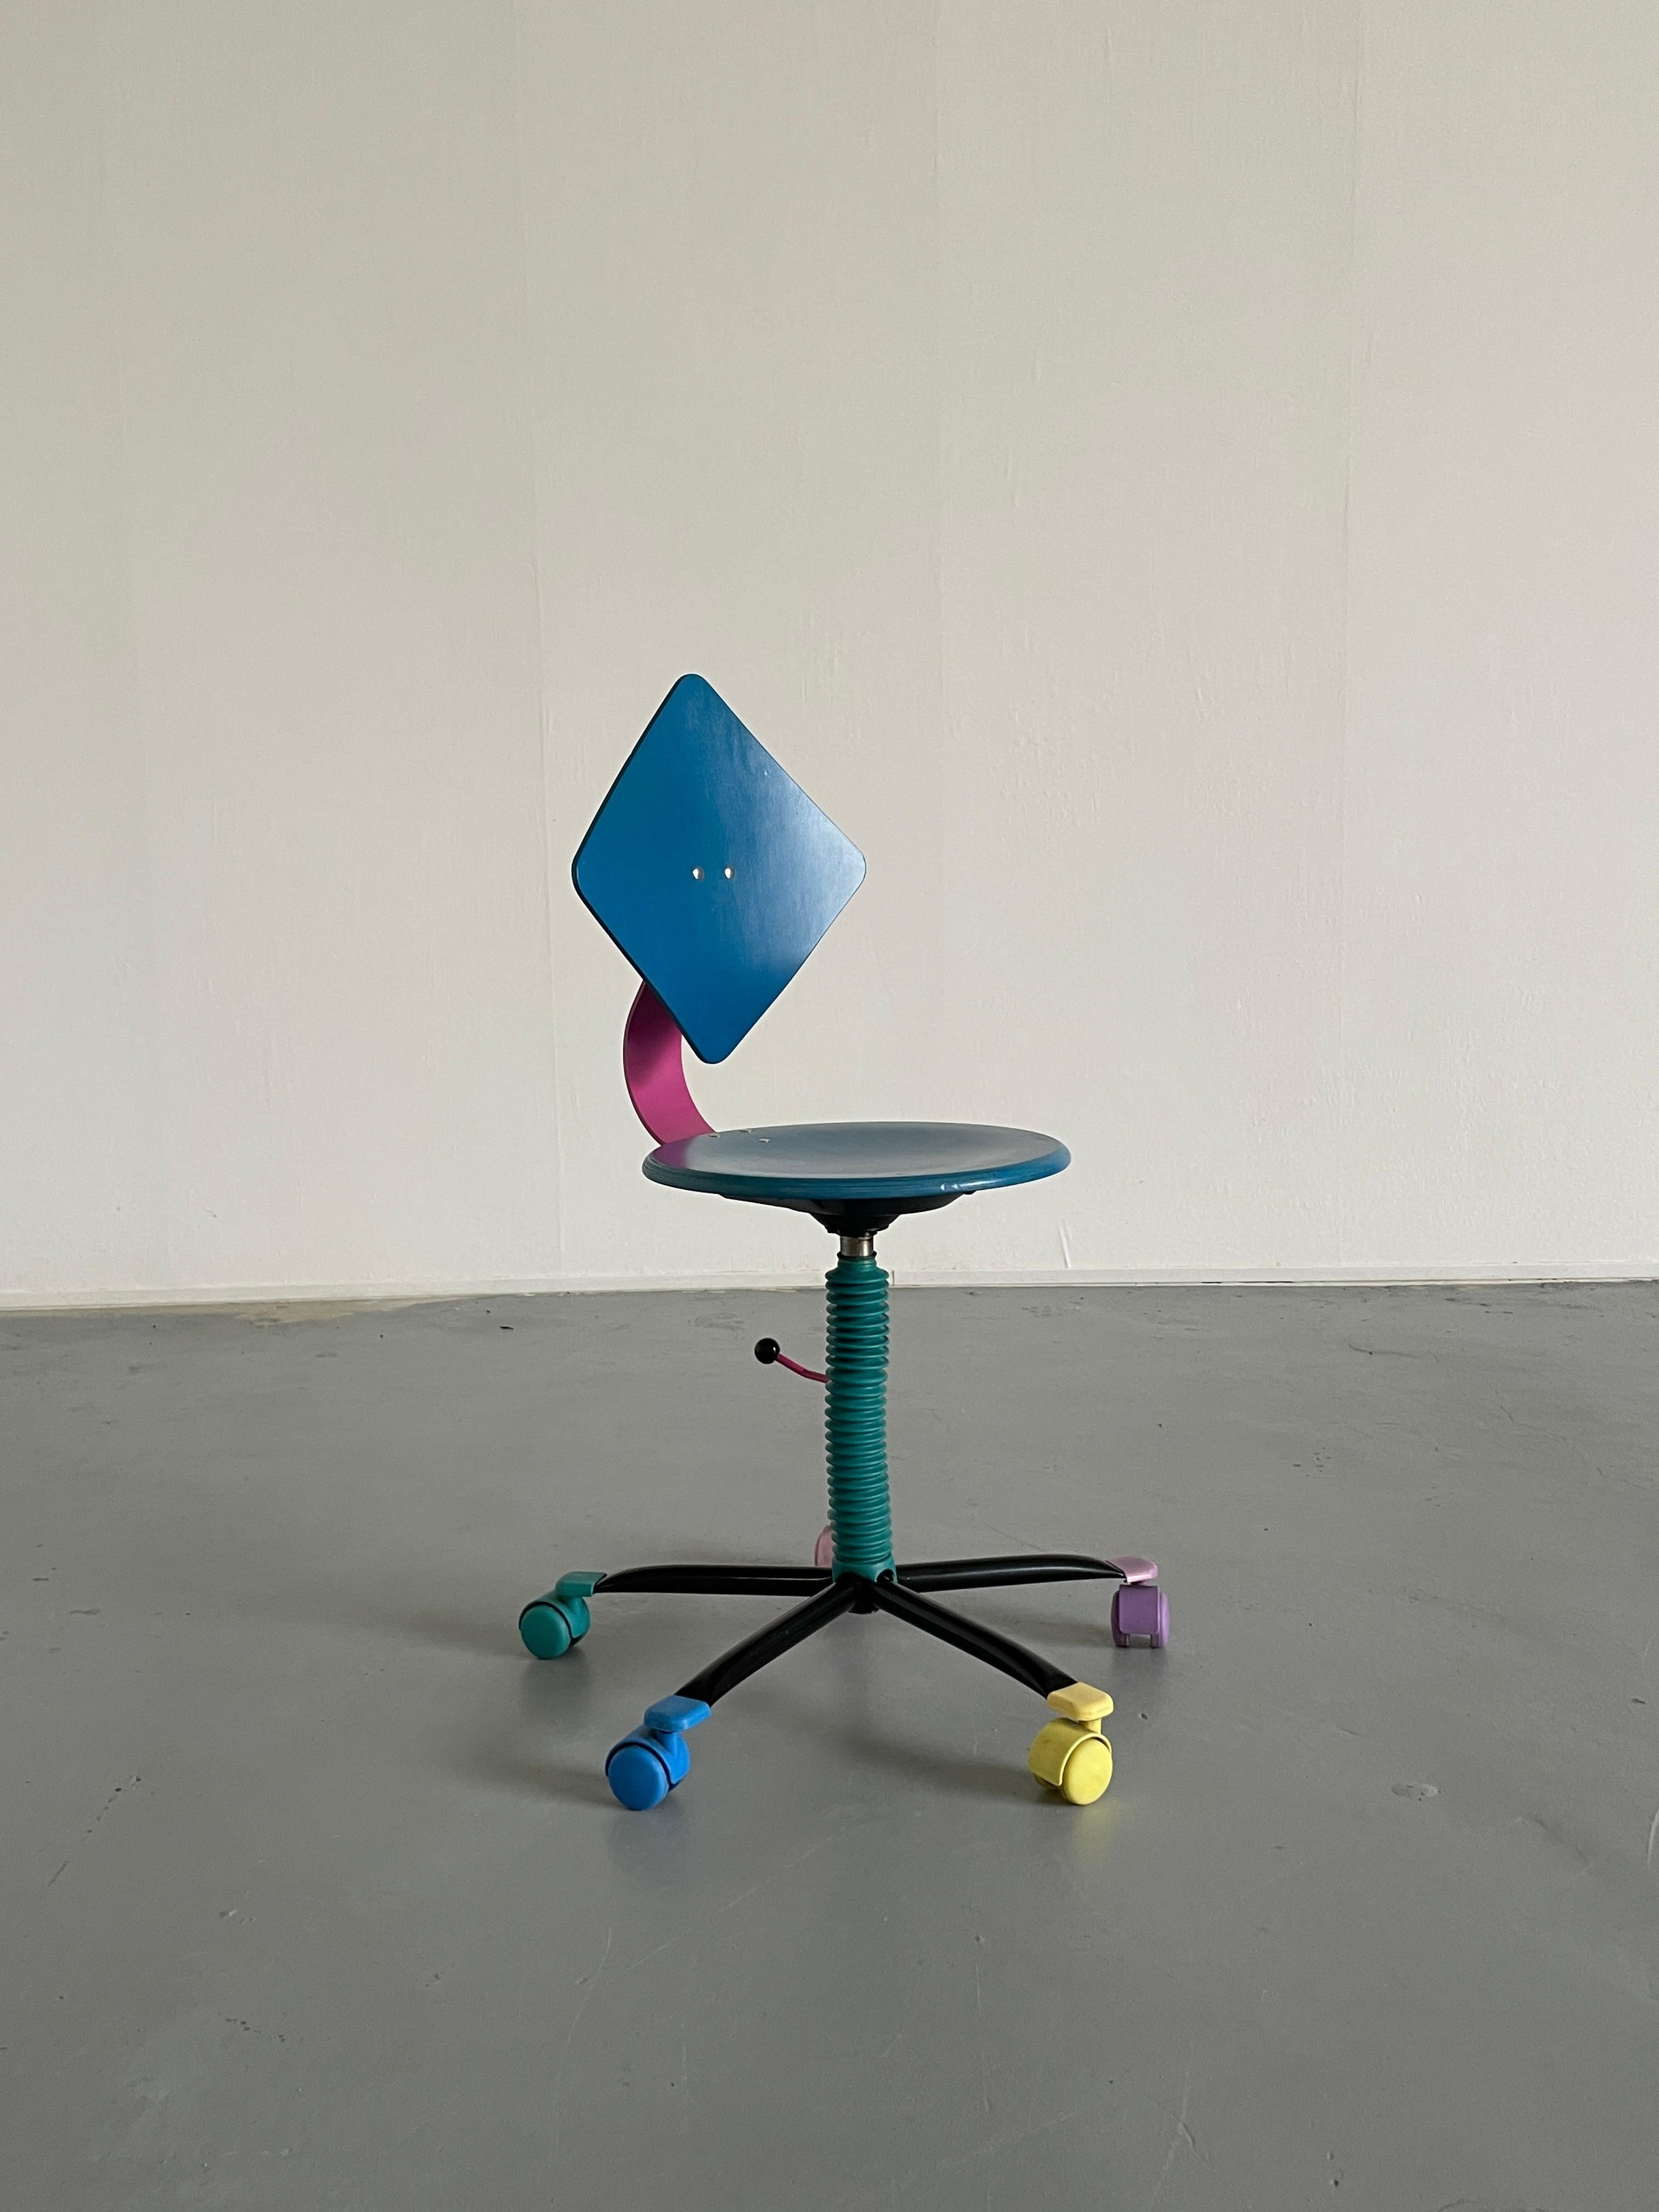 Postmodern Memphis style adjustable office chair or kids chair by the German manufacturer Impac from the late 1980s.

A design that is strongly shaped by a postmodern design language and color world. Seat and backrest are made of wood and lacquered.